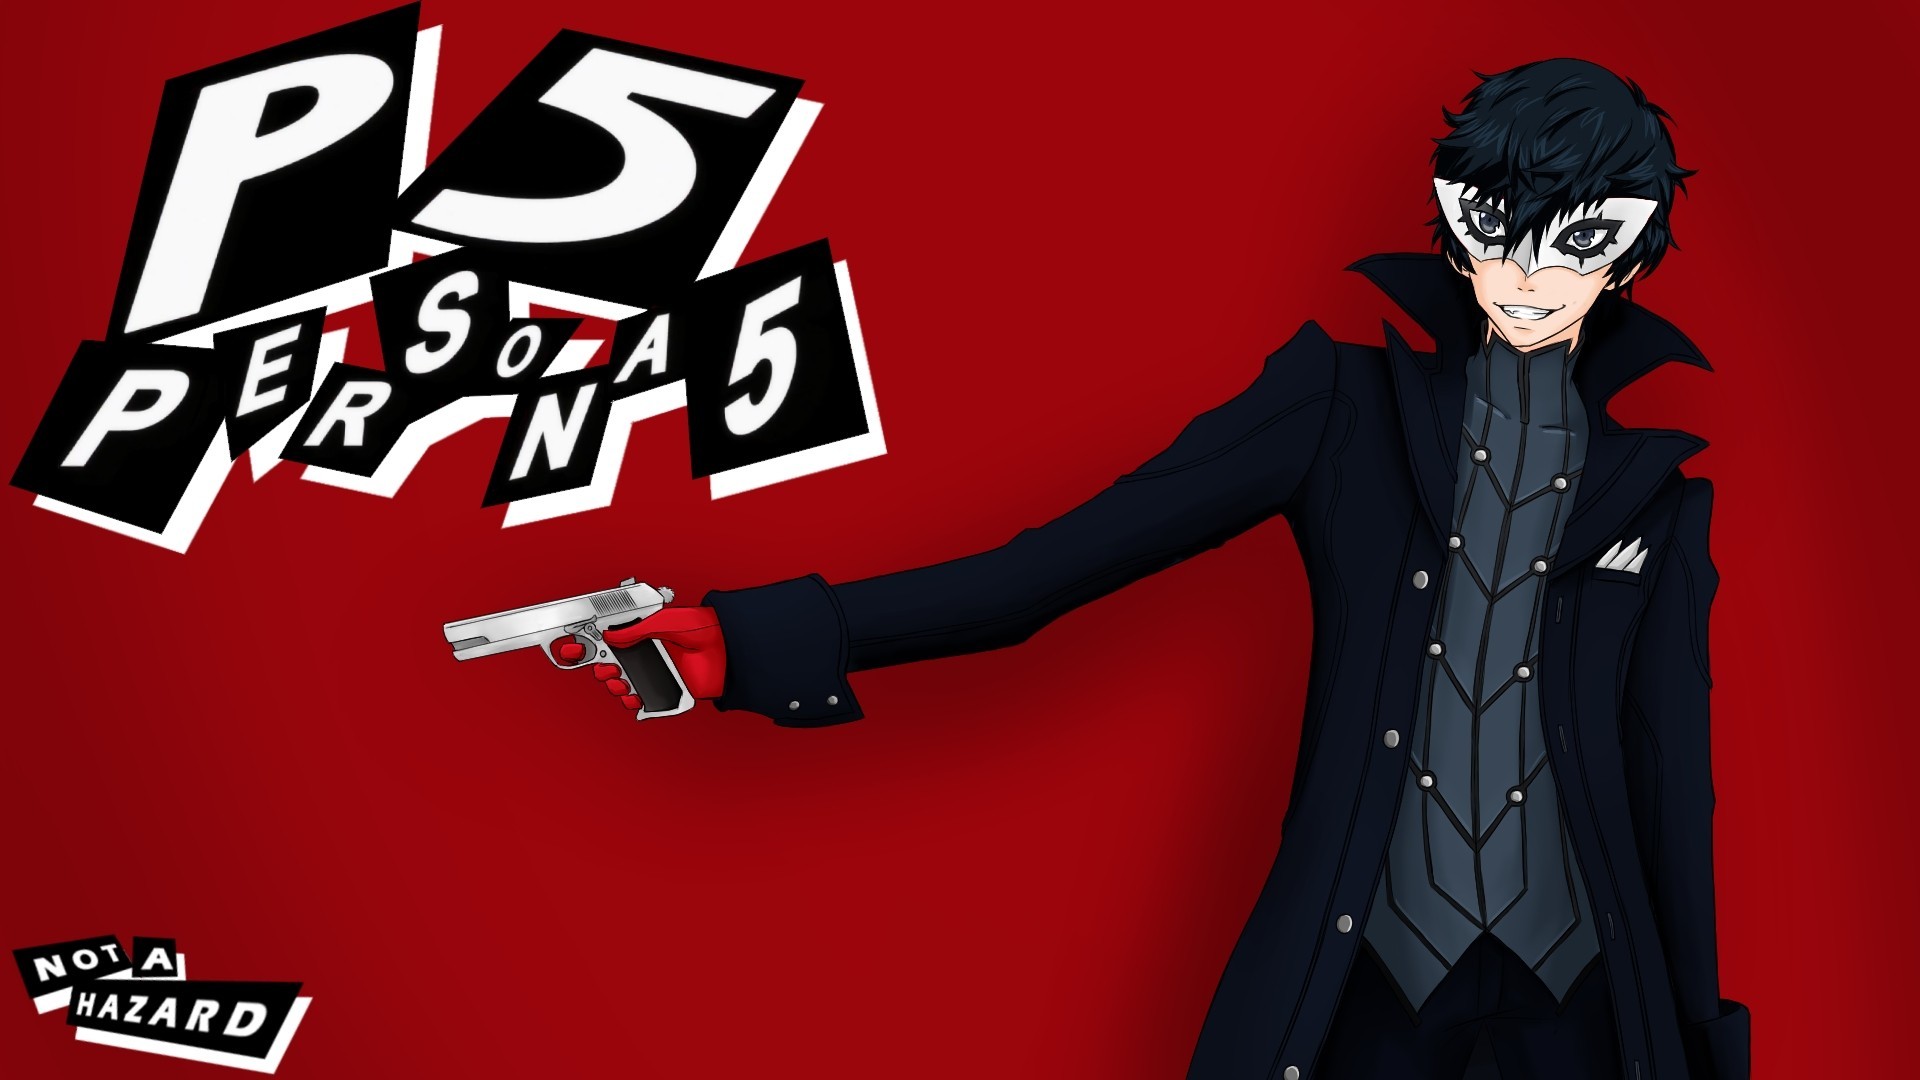 1920x1080 Persona 5 wallpapers best hd